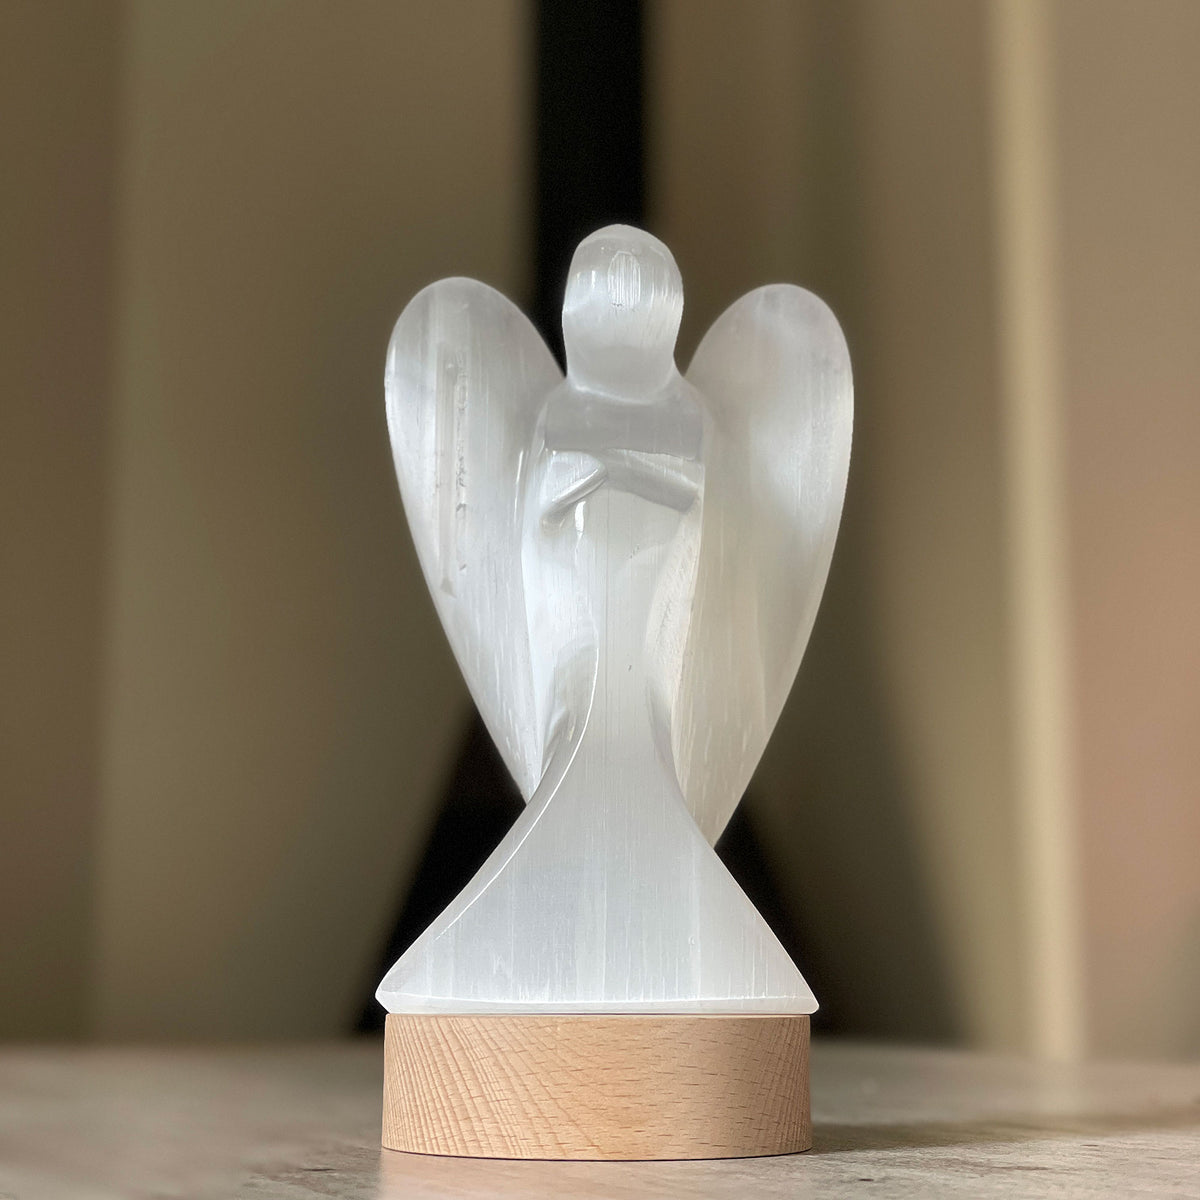 Selenite Lamp - Angel - Selenite is a beautiful and versatile crystal that offers numerous benefits, making it a popular choice for both decor and holistic purposes. Its natural beauty and unique translucent appearance make it an eye-catching addition to any home.